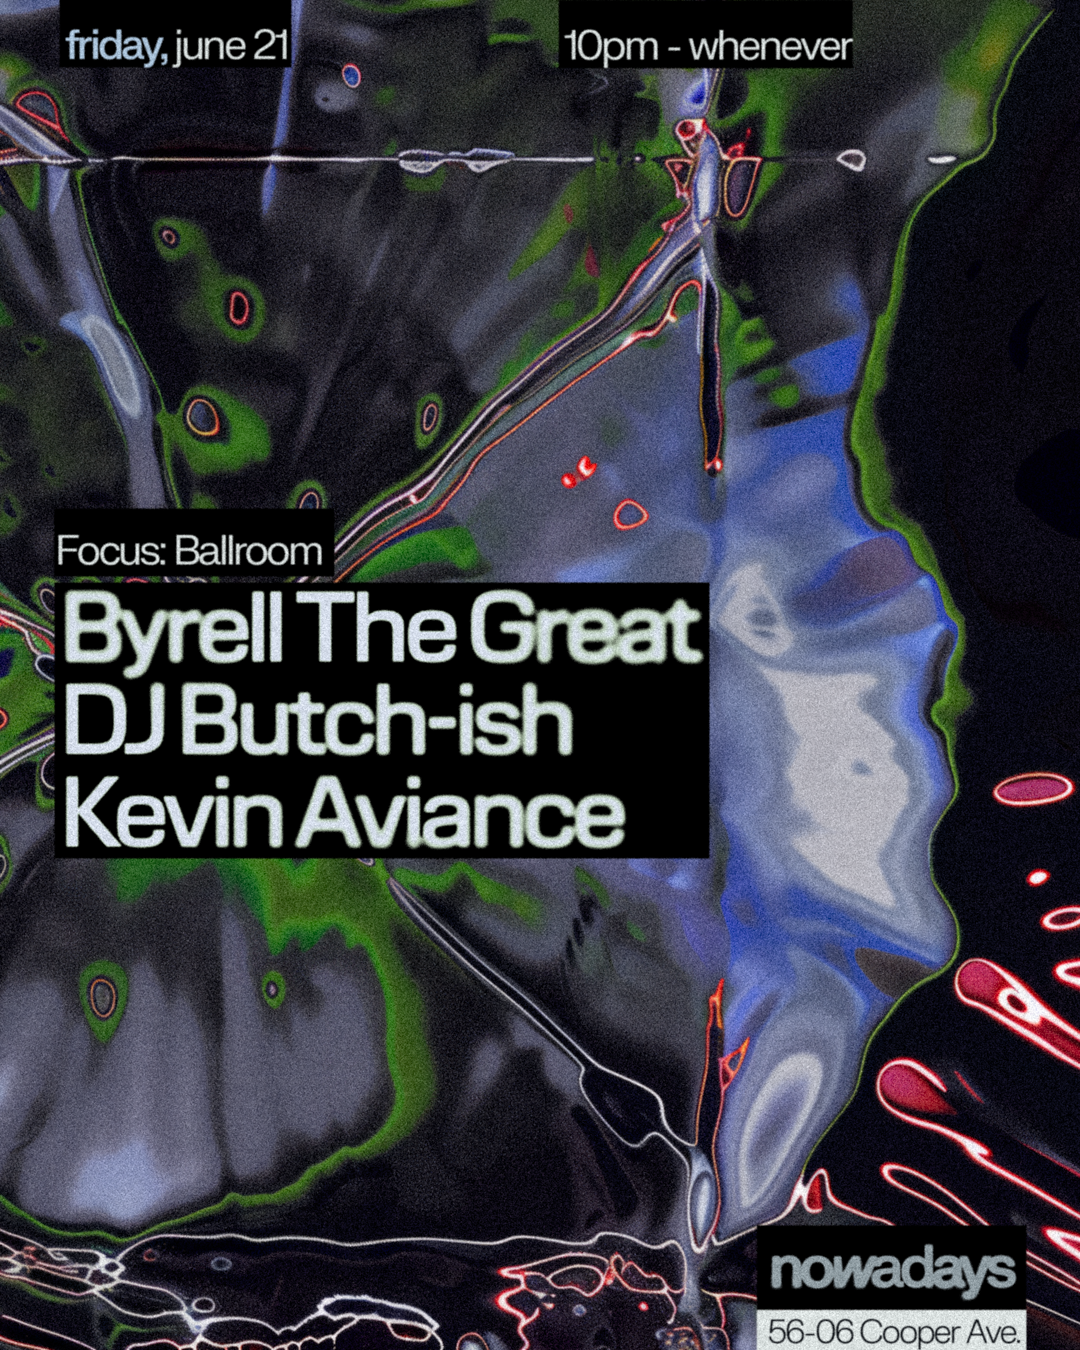 Focus: Ballroom with Byrell The Great, DJ Butch-ish, Kevin Aviance - Página frontal